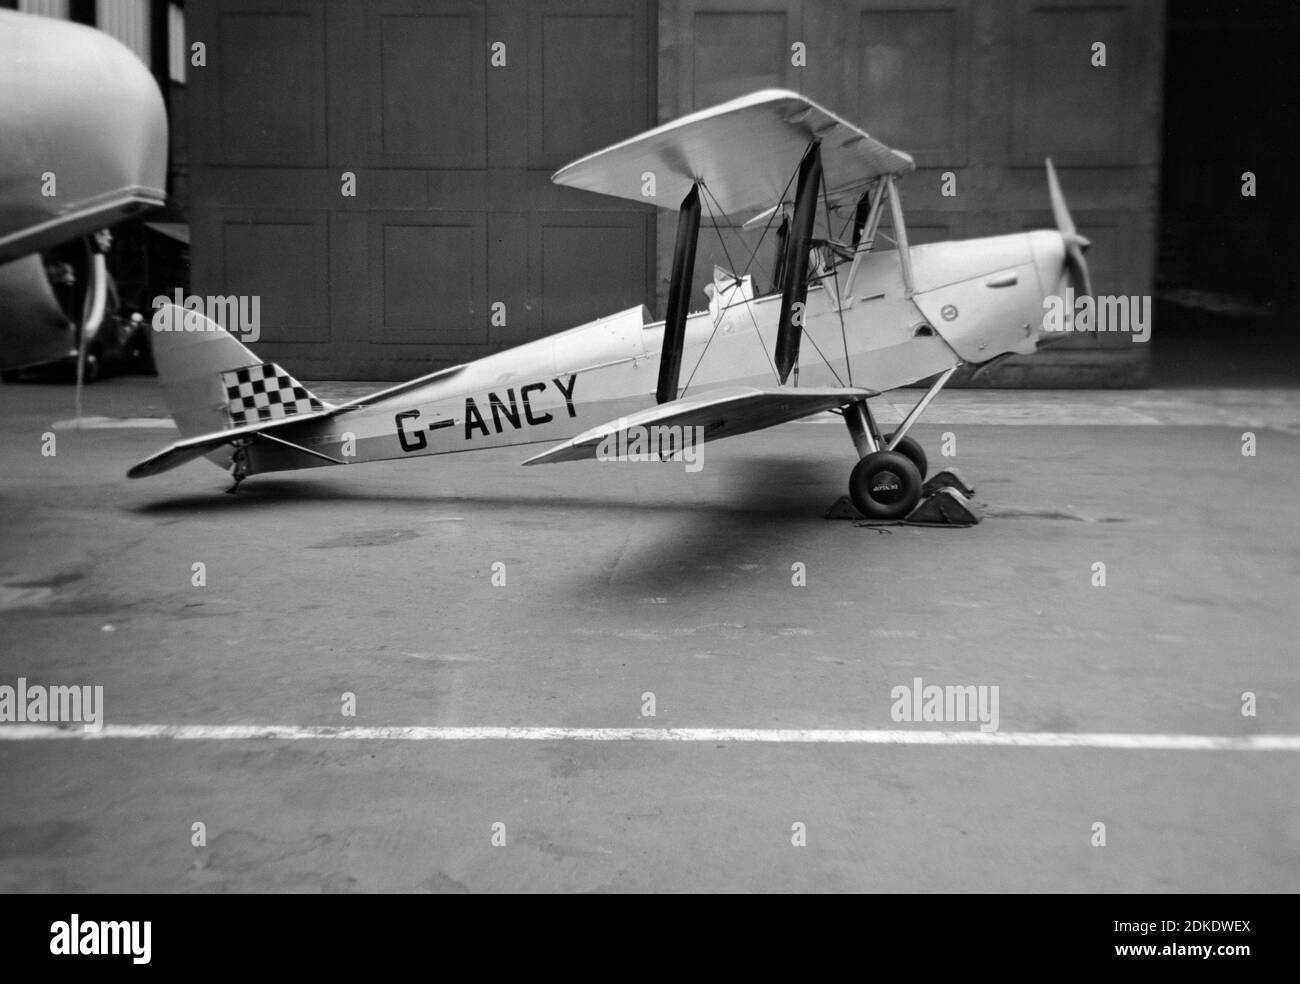 A vintage 1954 black and white photograph showing a De Havilland Tiger Moth aeroplane, registration G-ANCY, parked outside of a hangar. Stock Photo